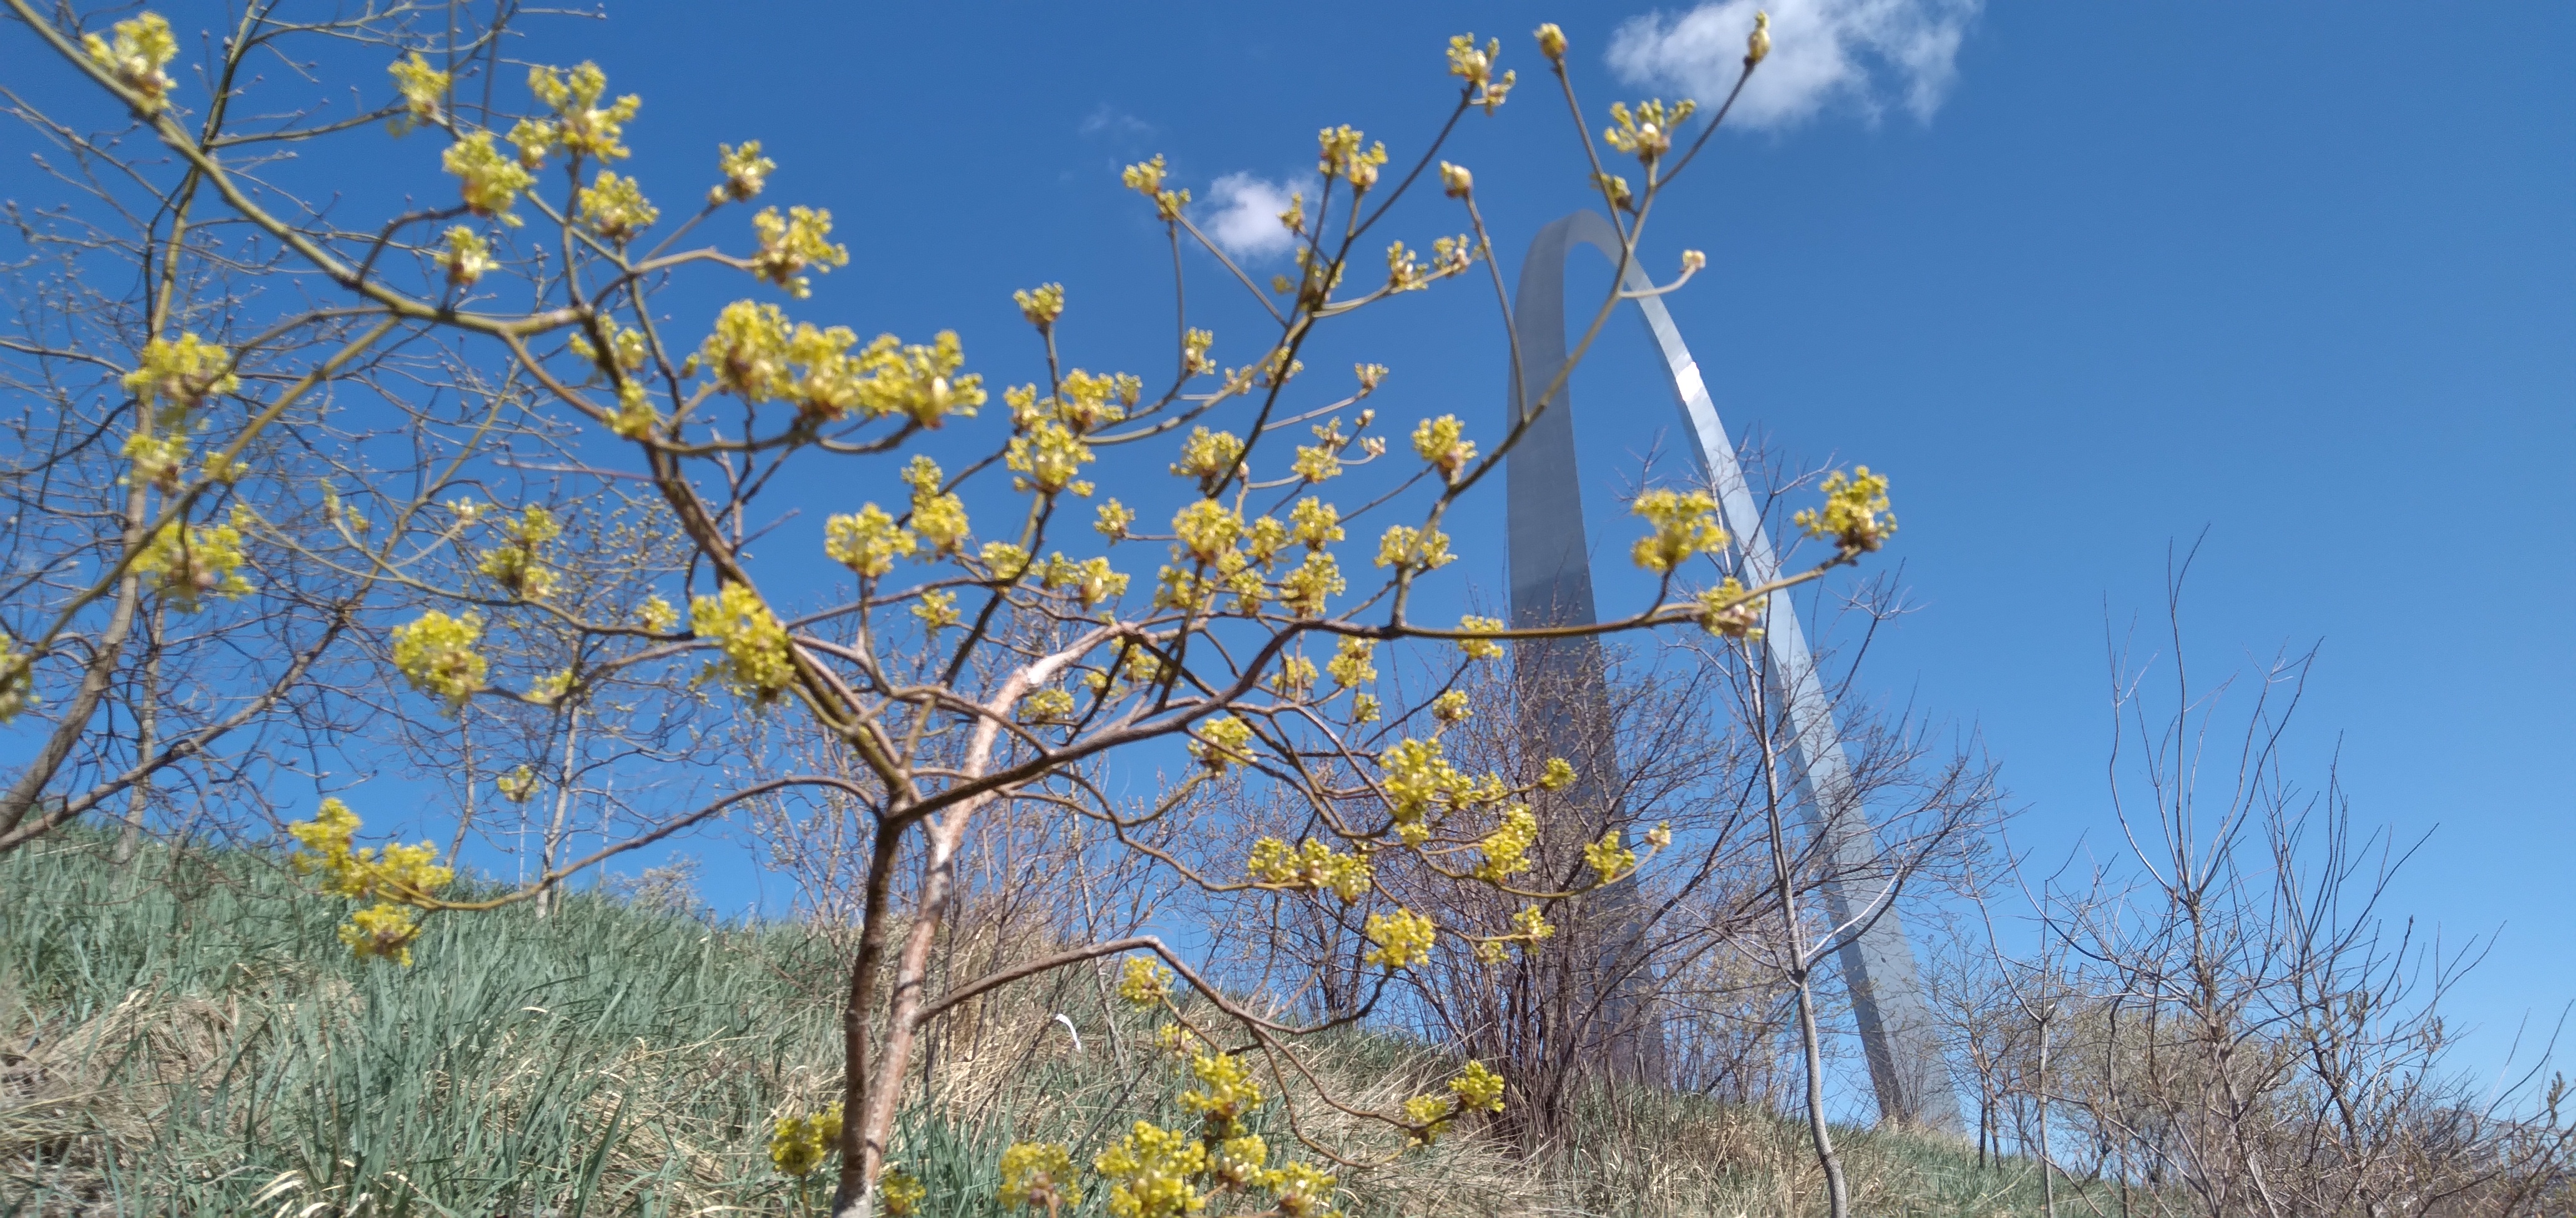 A yellow-blossomed tree, with grass in the foreground. The Gateway Arch is in the background.